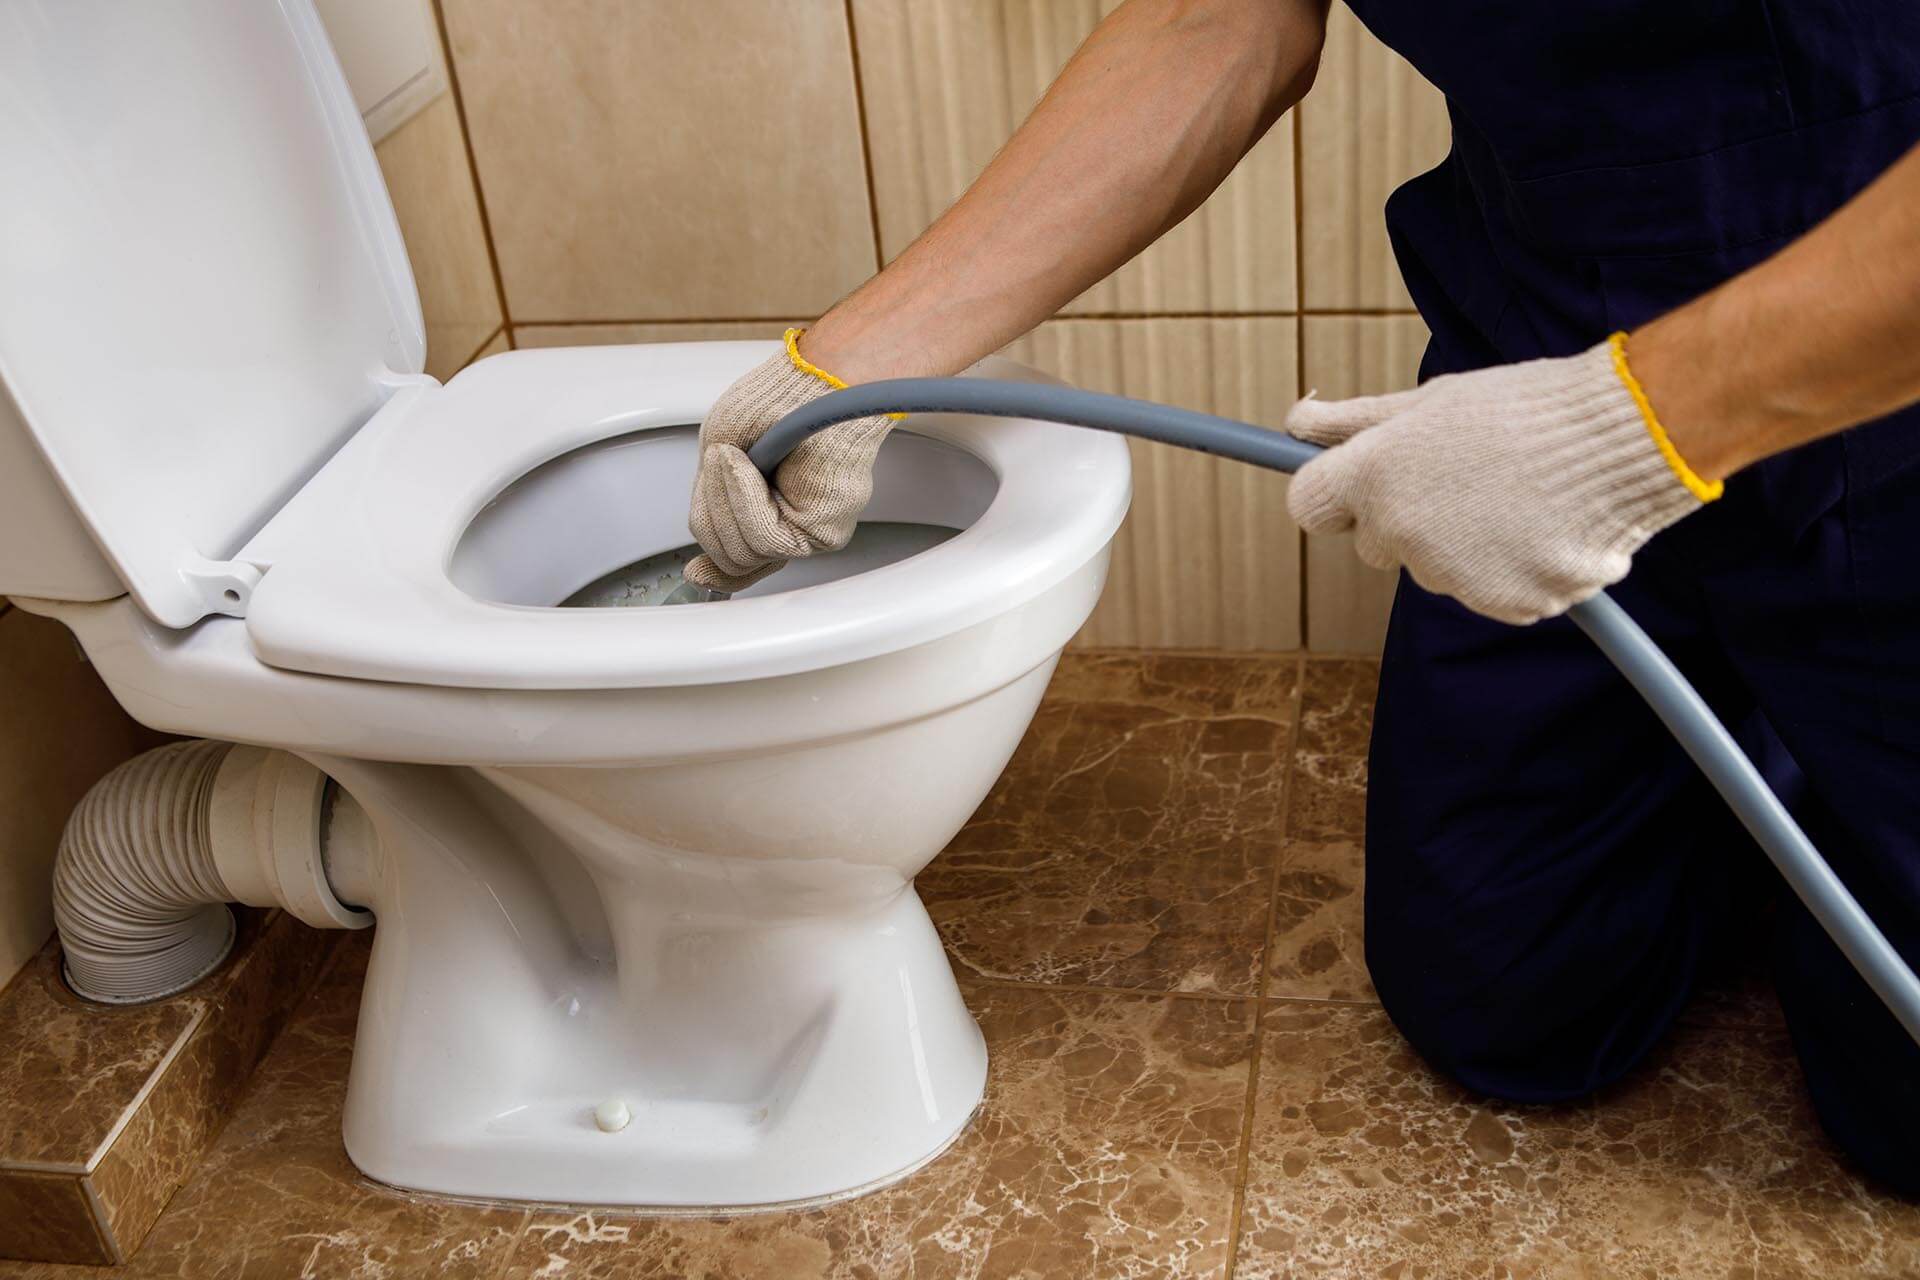 6 Tips to Hiring Good Plumbers for Your House